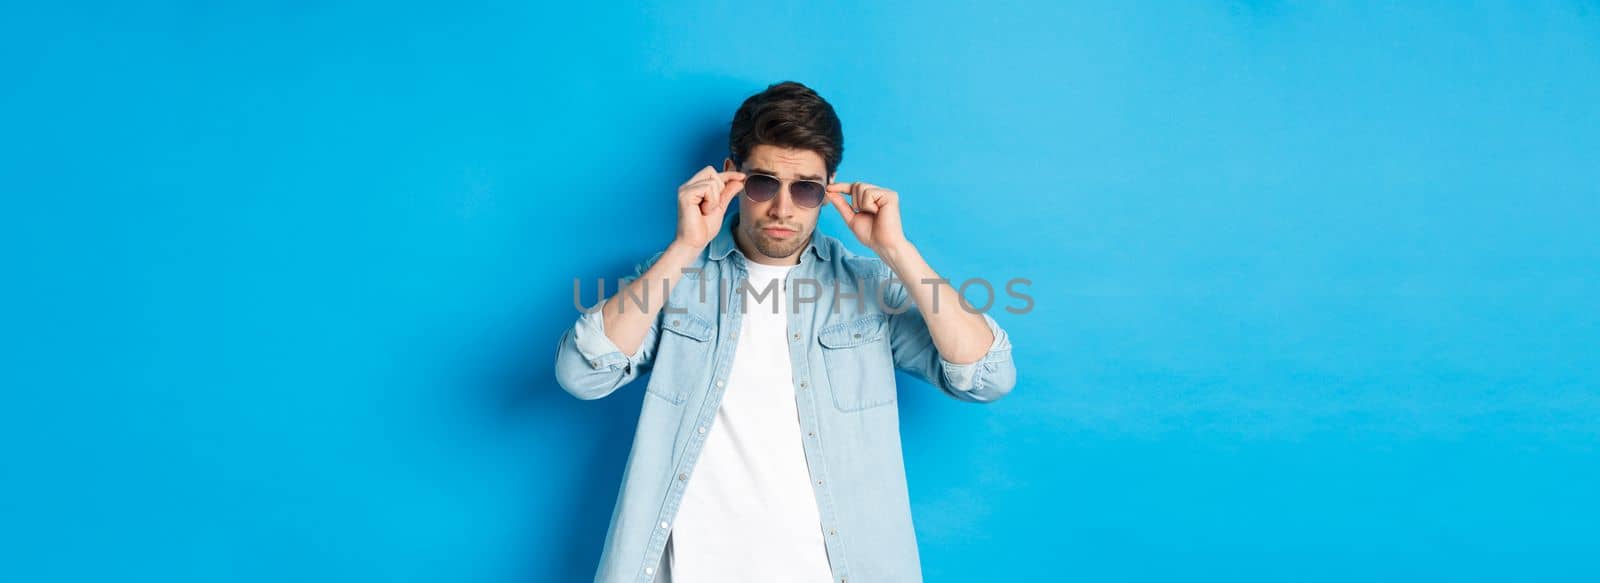 Confident macho man put on sunglasses, looking cool and sassy, standing over blue background.